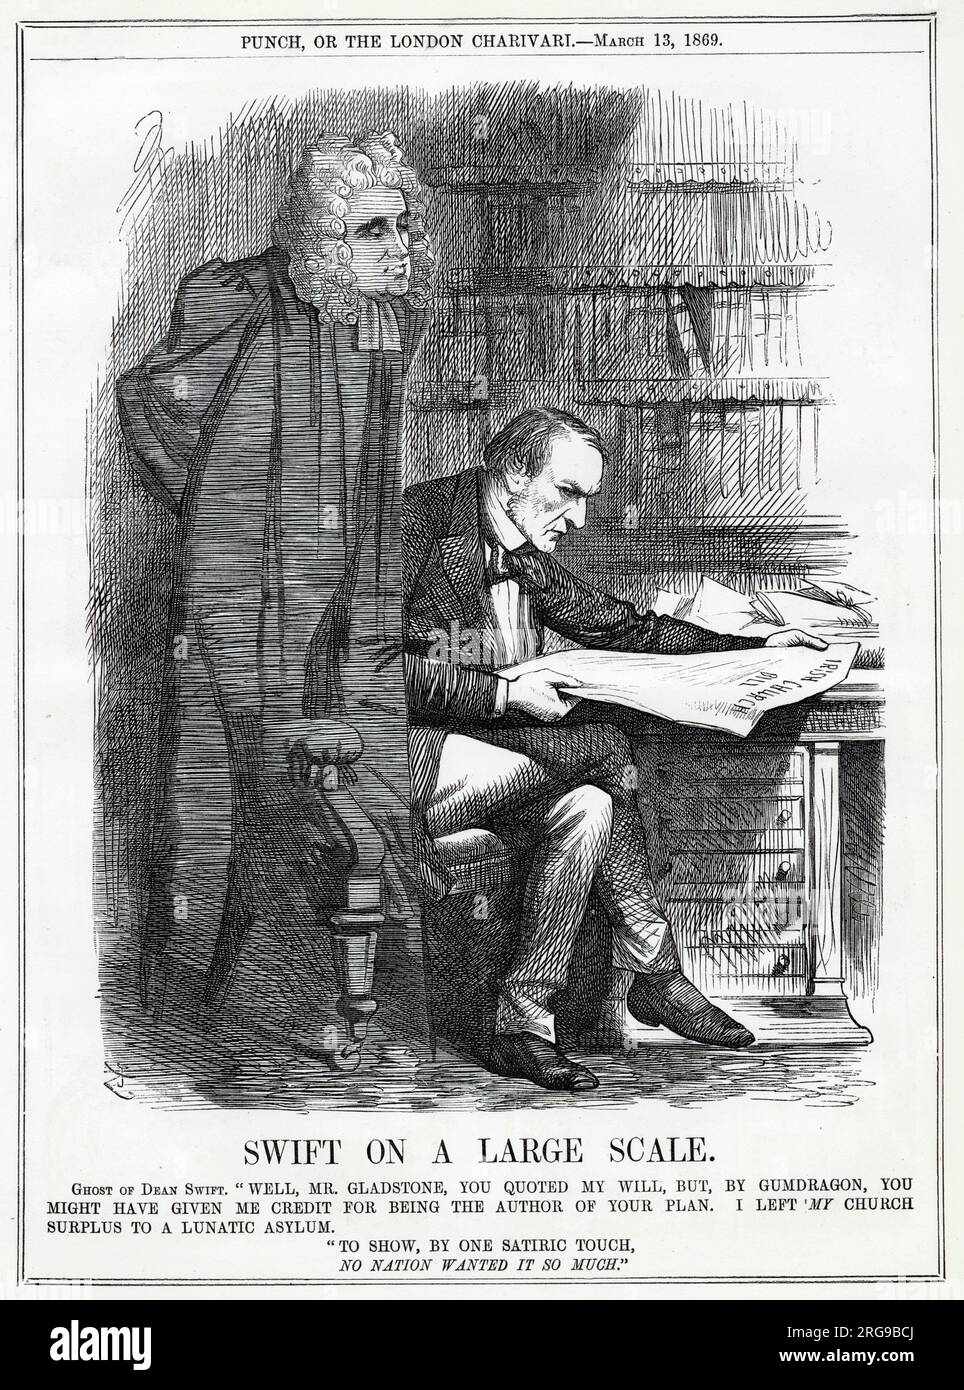 Cartoon, Swift on a Large Scale -- a comment on Gladstone's assigning the surplus from Irish Church endowments (resulting from the disestablishment of the Irish Church) for humanitarian purposes. The ghost of Dean Swift approves of his action, but thinks he should have credited him with the original idea, as he also left money in his will for similar purposes. Stock Photo